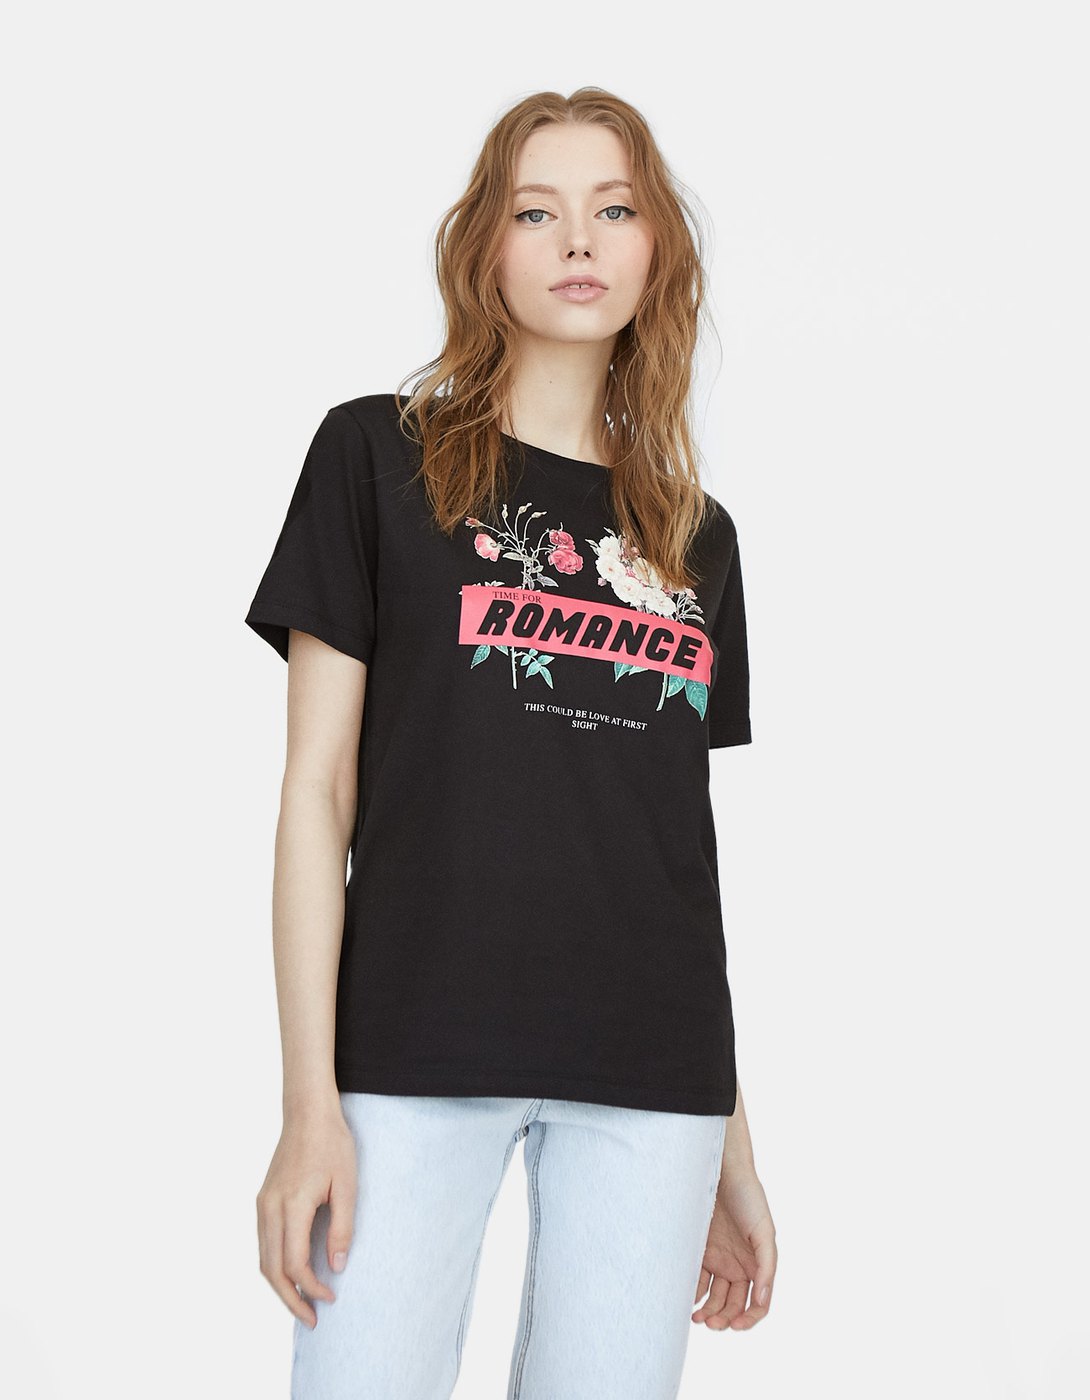 MARIA'S STYLE PLANET: GRAPHIC TEES